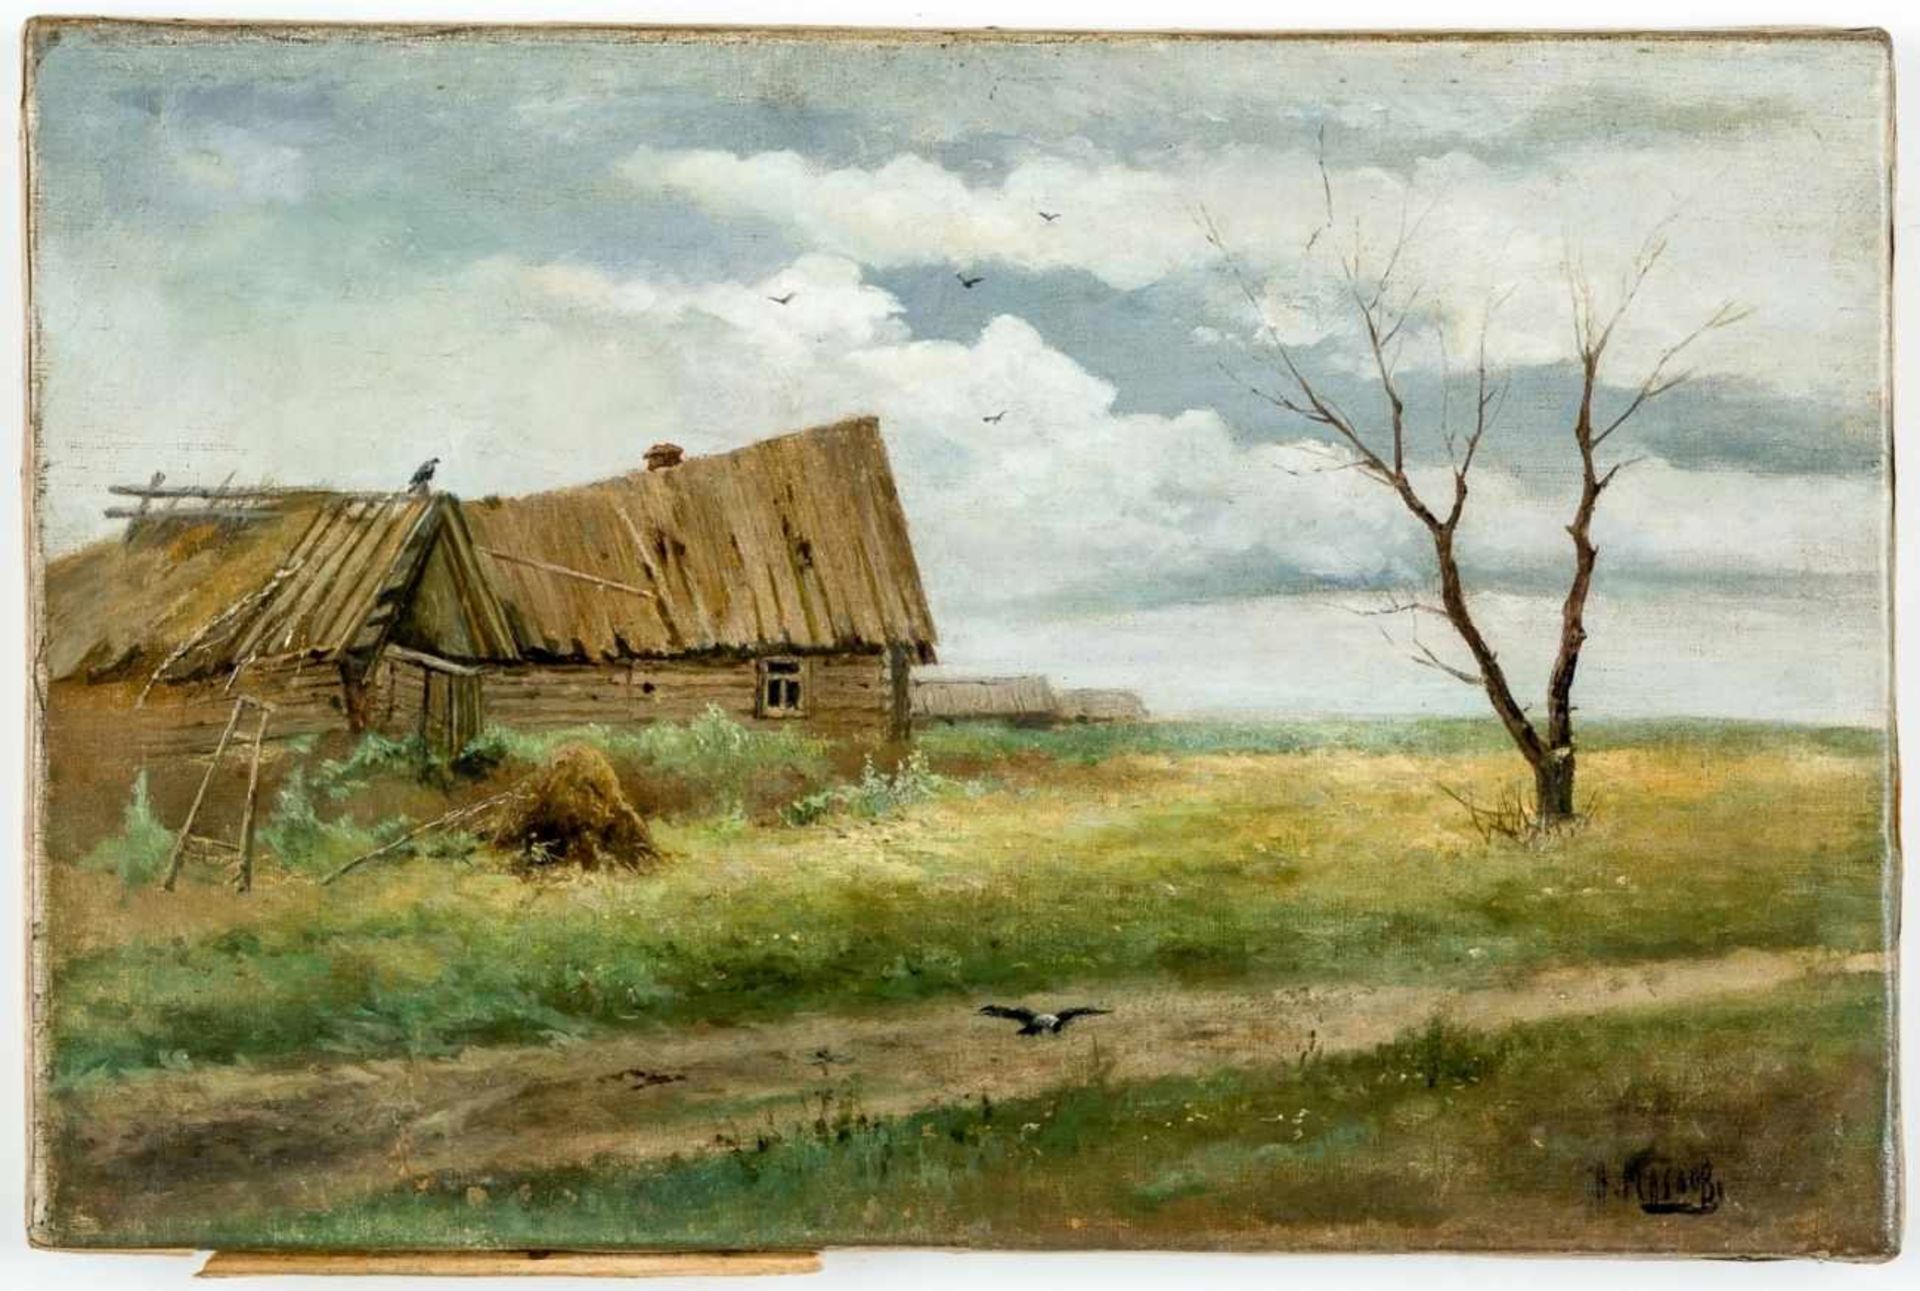 Russian Landscape, Russia, oil on canvas, signed in cyrillic: A. Maslov, probably AfanasijMaslov (